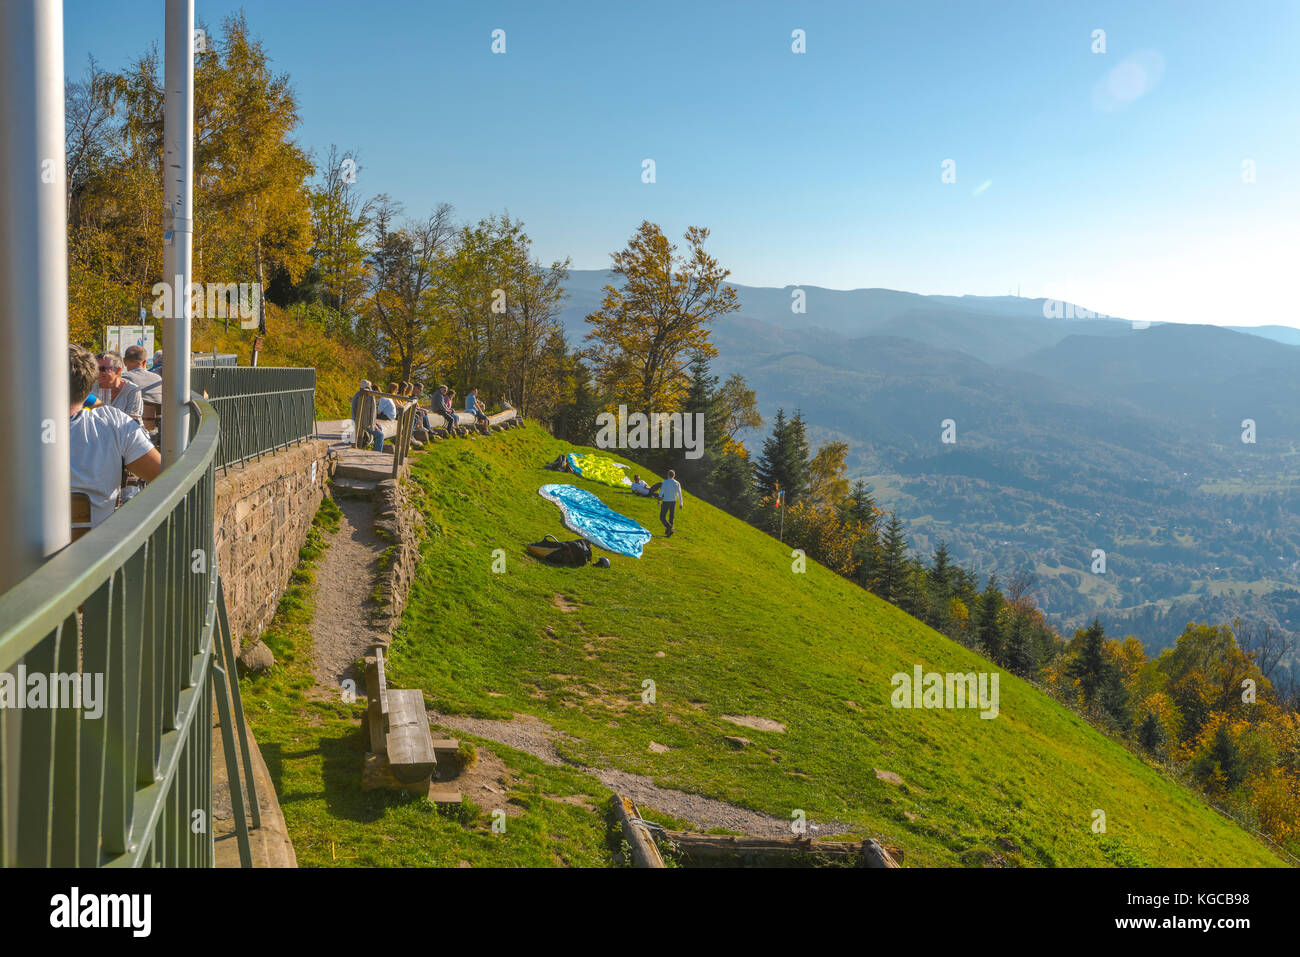 starting place for paragliders at the top station of the Merkur, landmark mountain of the spa town Baden-Baden, Germany Stock Photo